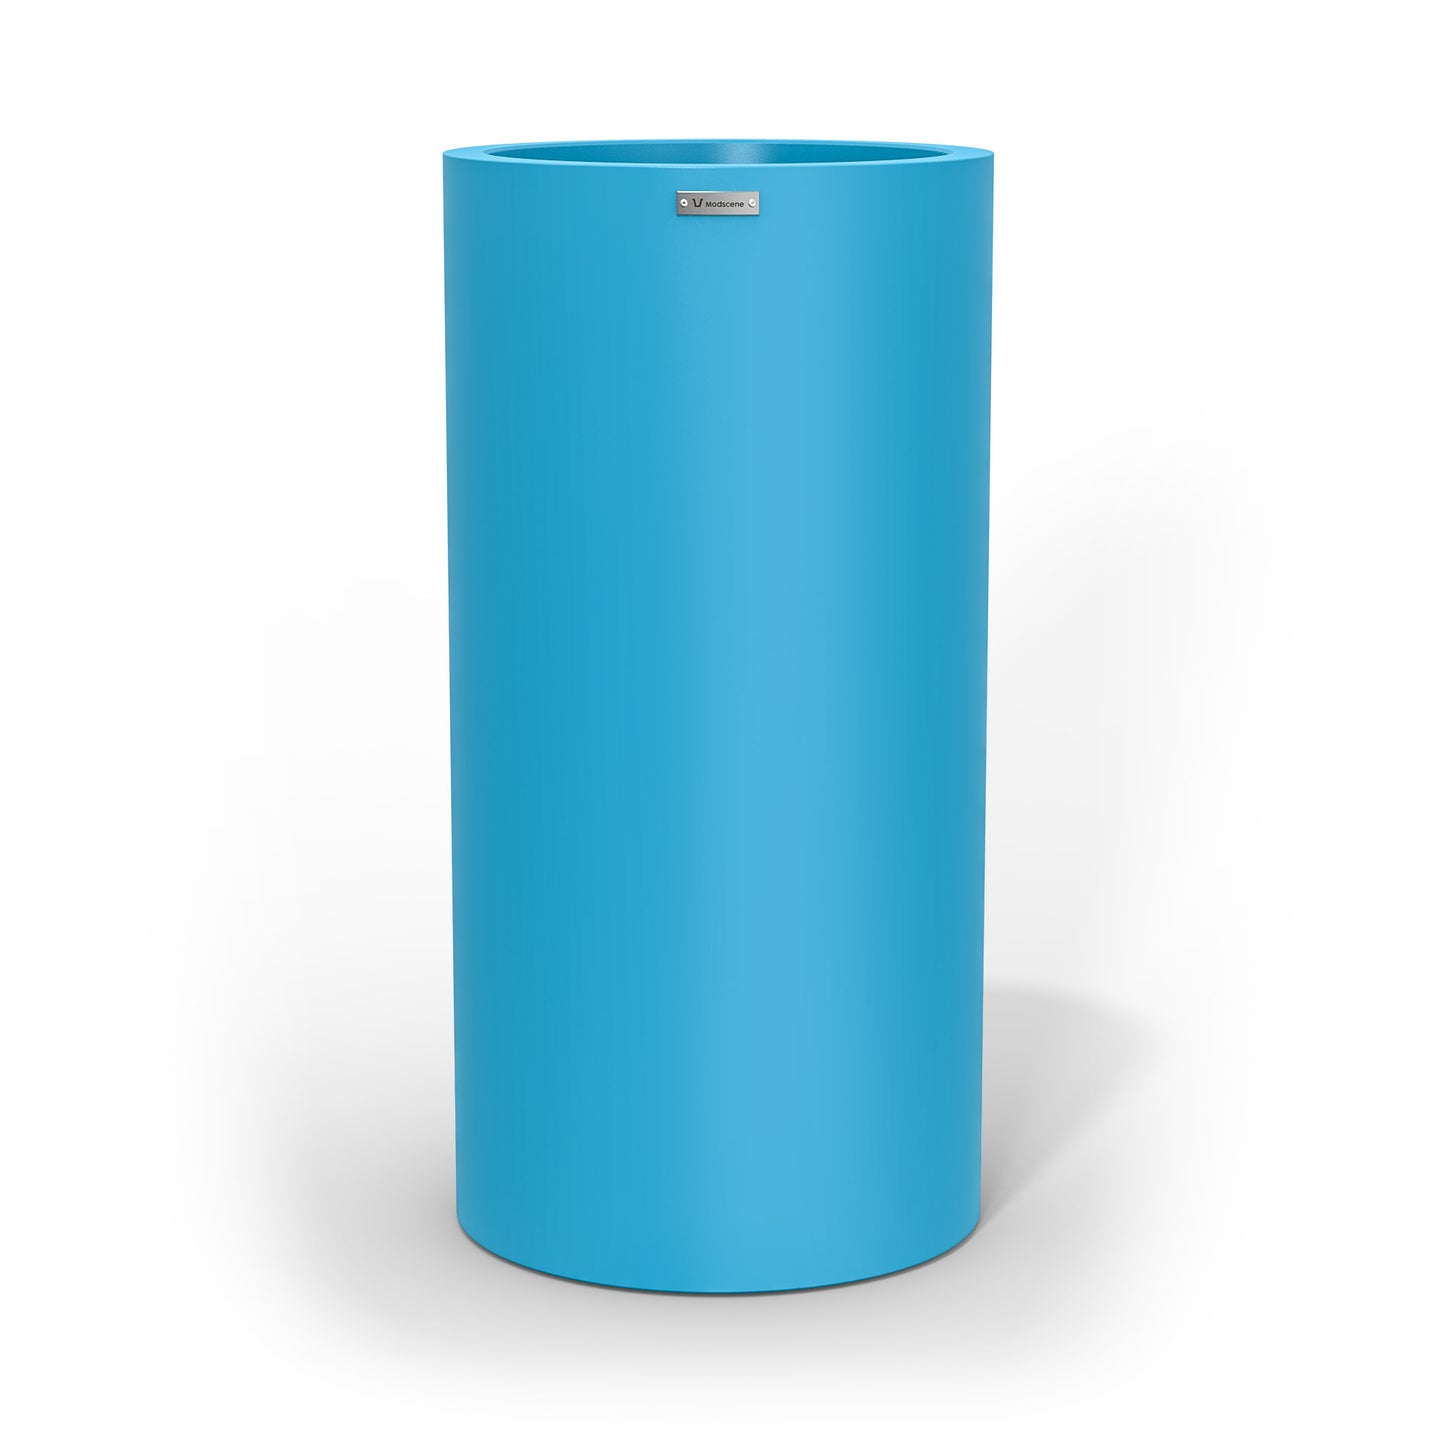 A tall cylinder planter pot in blue made by Modscene New Zealand.